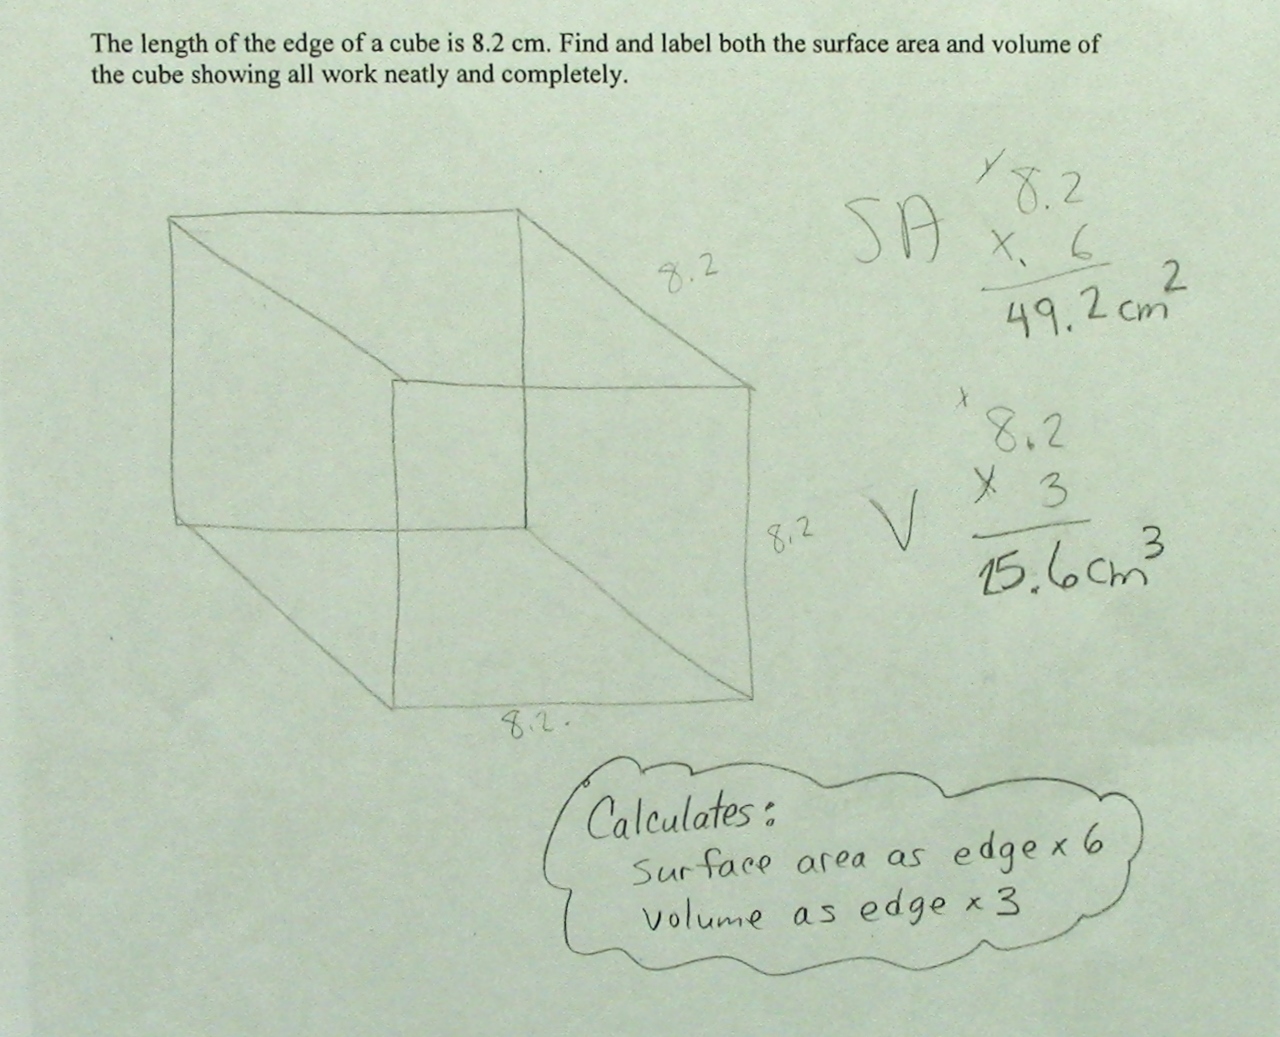 Cube Volume And Surface Area Students Are Asked To Calculate The Volume And Surface Area Of A Cube